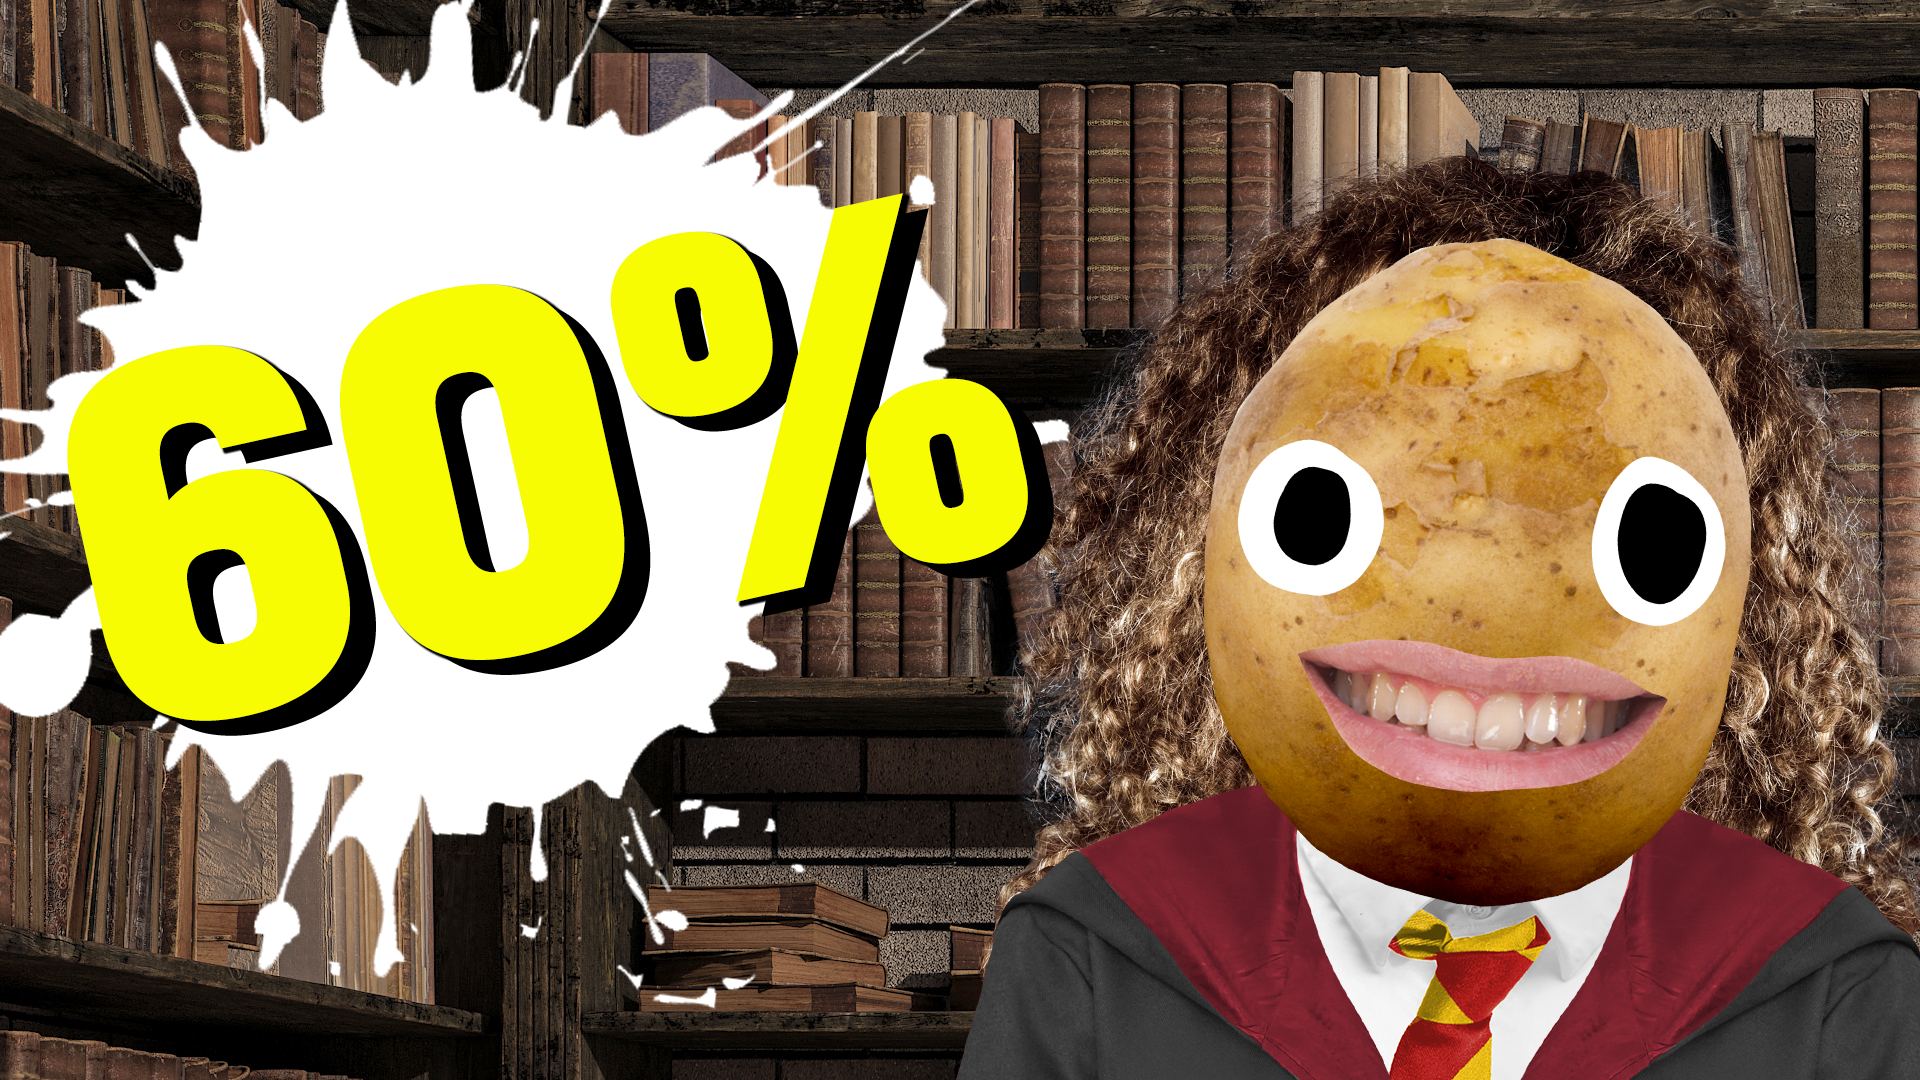 Result: 60 per cent Hermione